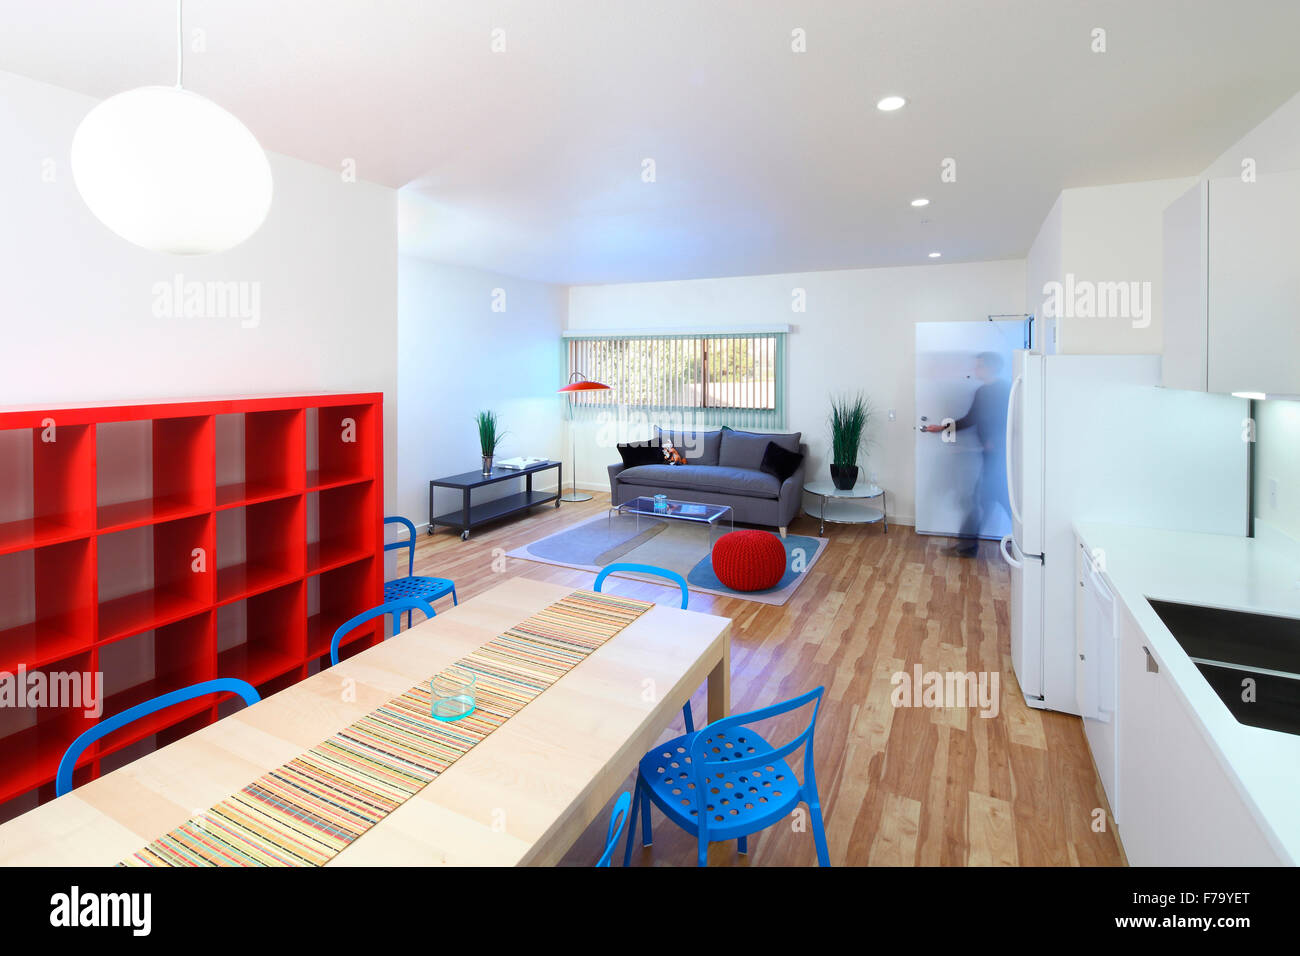 Apartment interior at High Place West Affordable Homes, Santa Monica, CA by Kanner Architects and CCSM Stock Photo